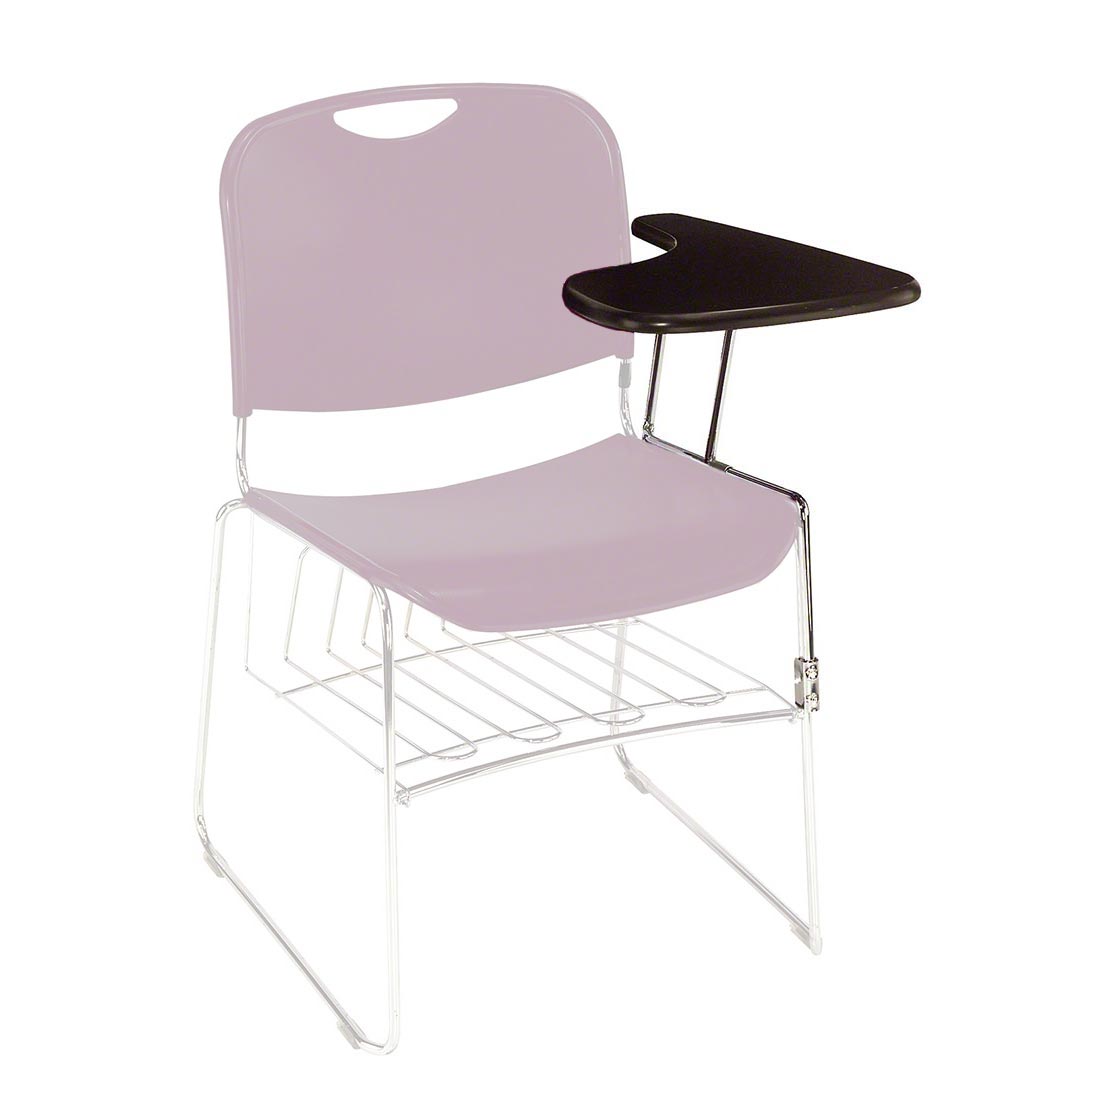 MODEL MT-904 single injection Moulded Arm Table for Student Chair